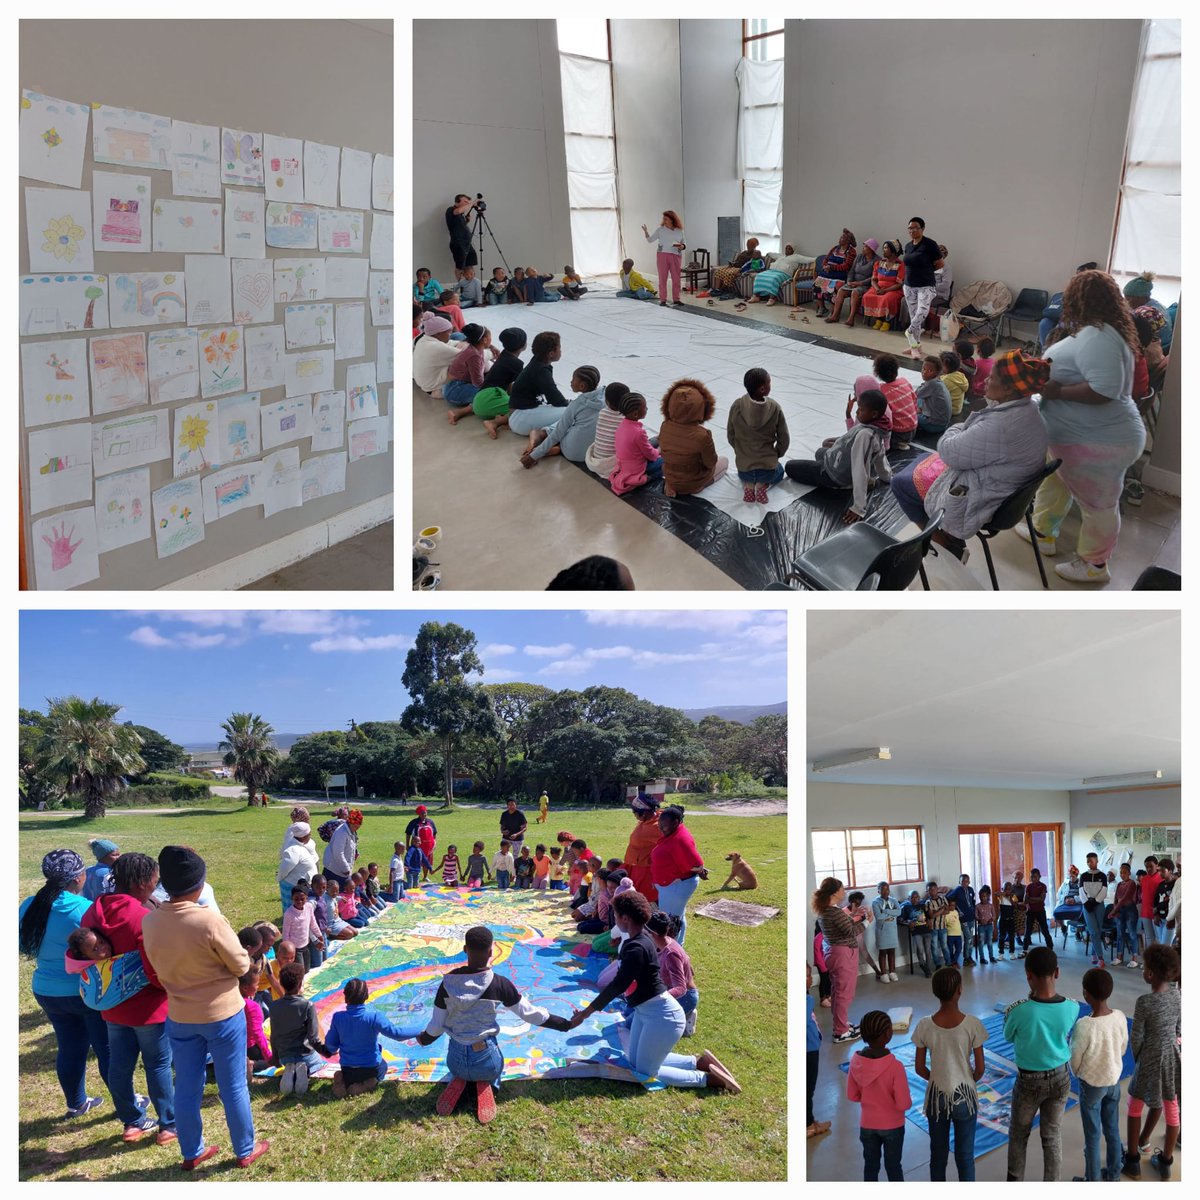 Day 1 of the 1st Kids' Guernica with @KeiskammaTrust in South Africa got off to a great start! Looking at the beautiful 2019 Futurehope Maurice canvas & starting to draw with @savinatarsitano @DrNicolaAshmore @MarinaNovelli73 #artsresearch #picasso #guernica #artactivism